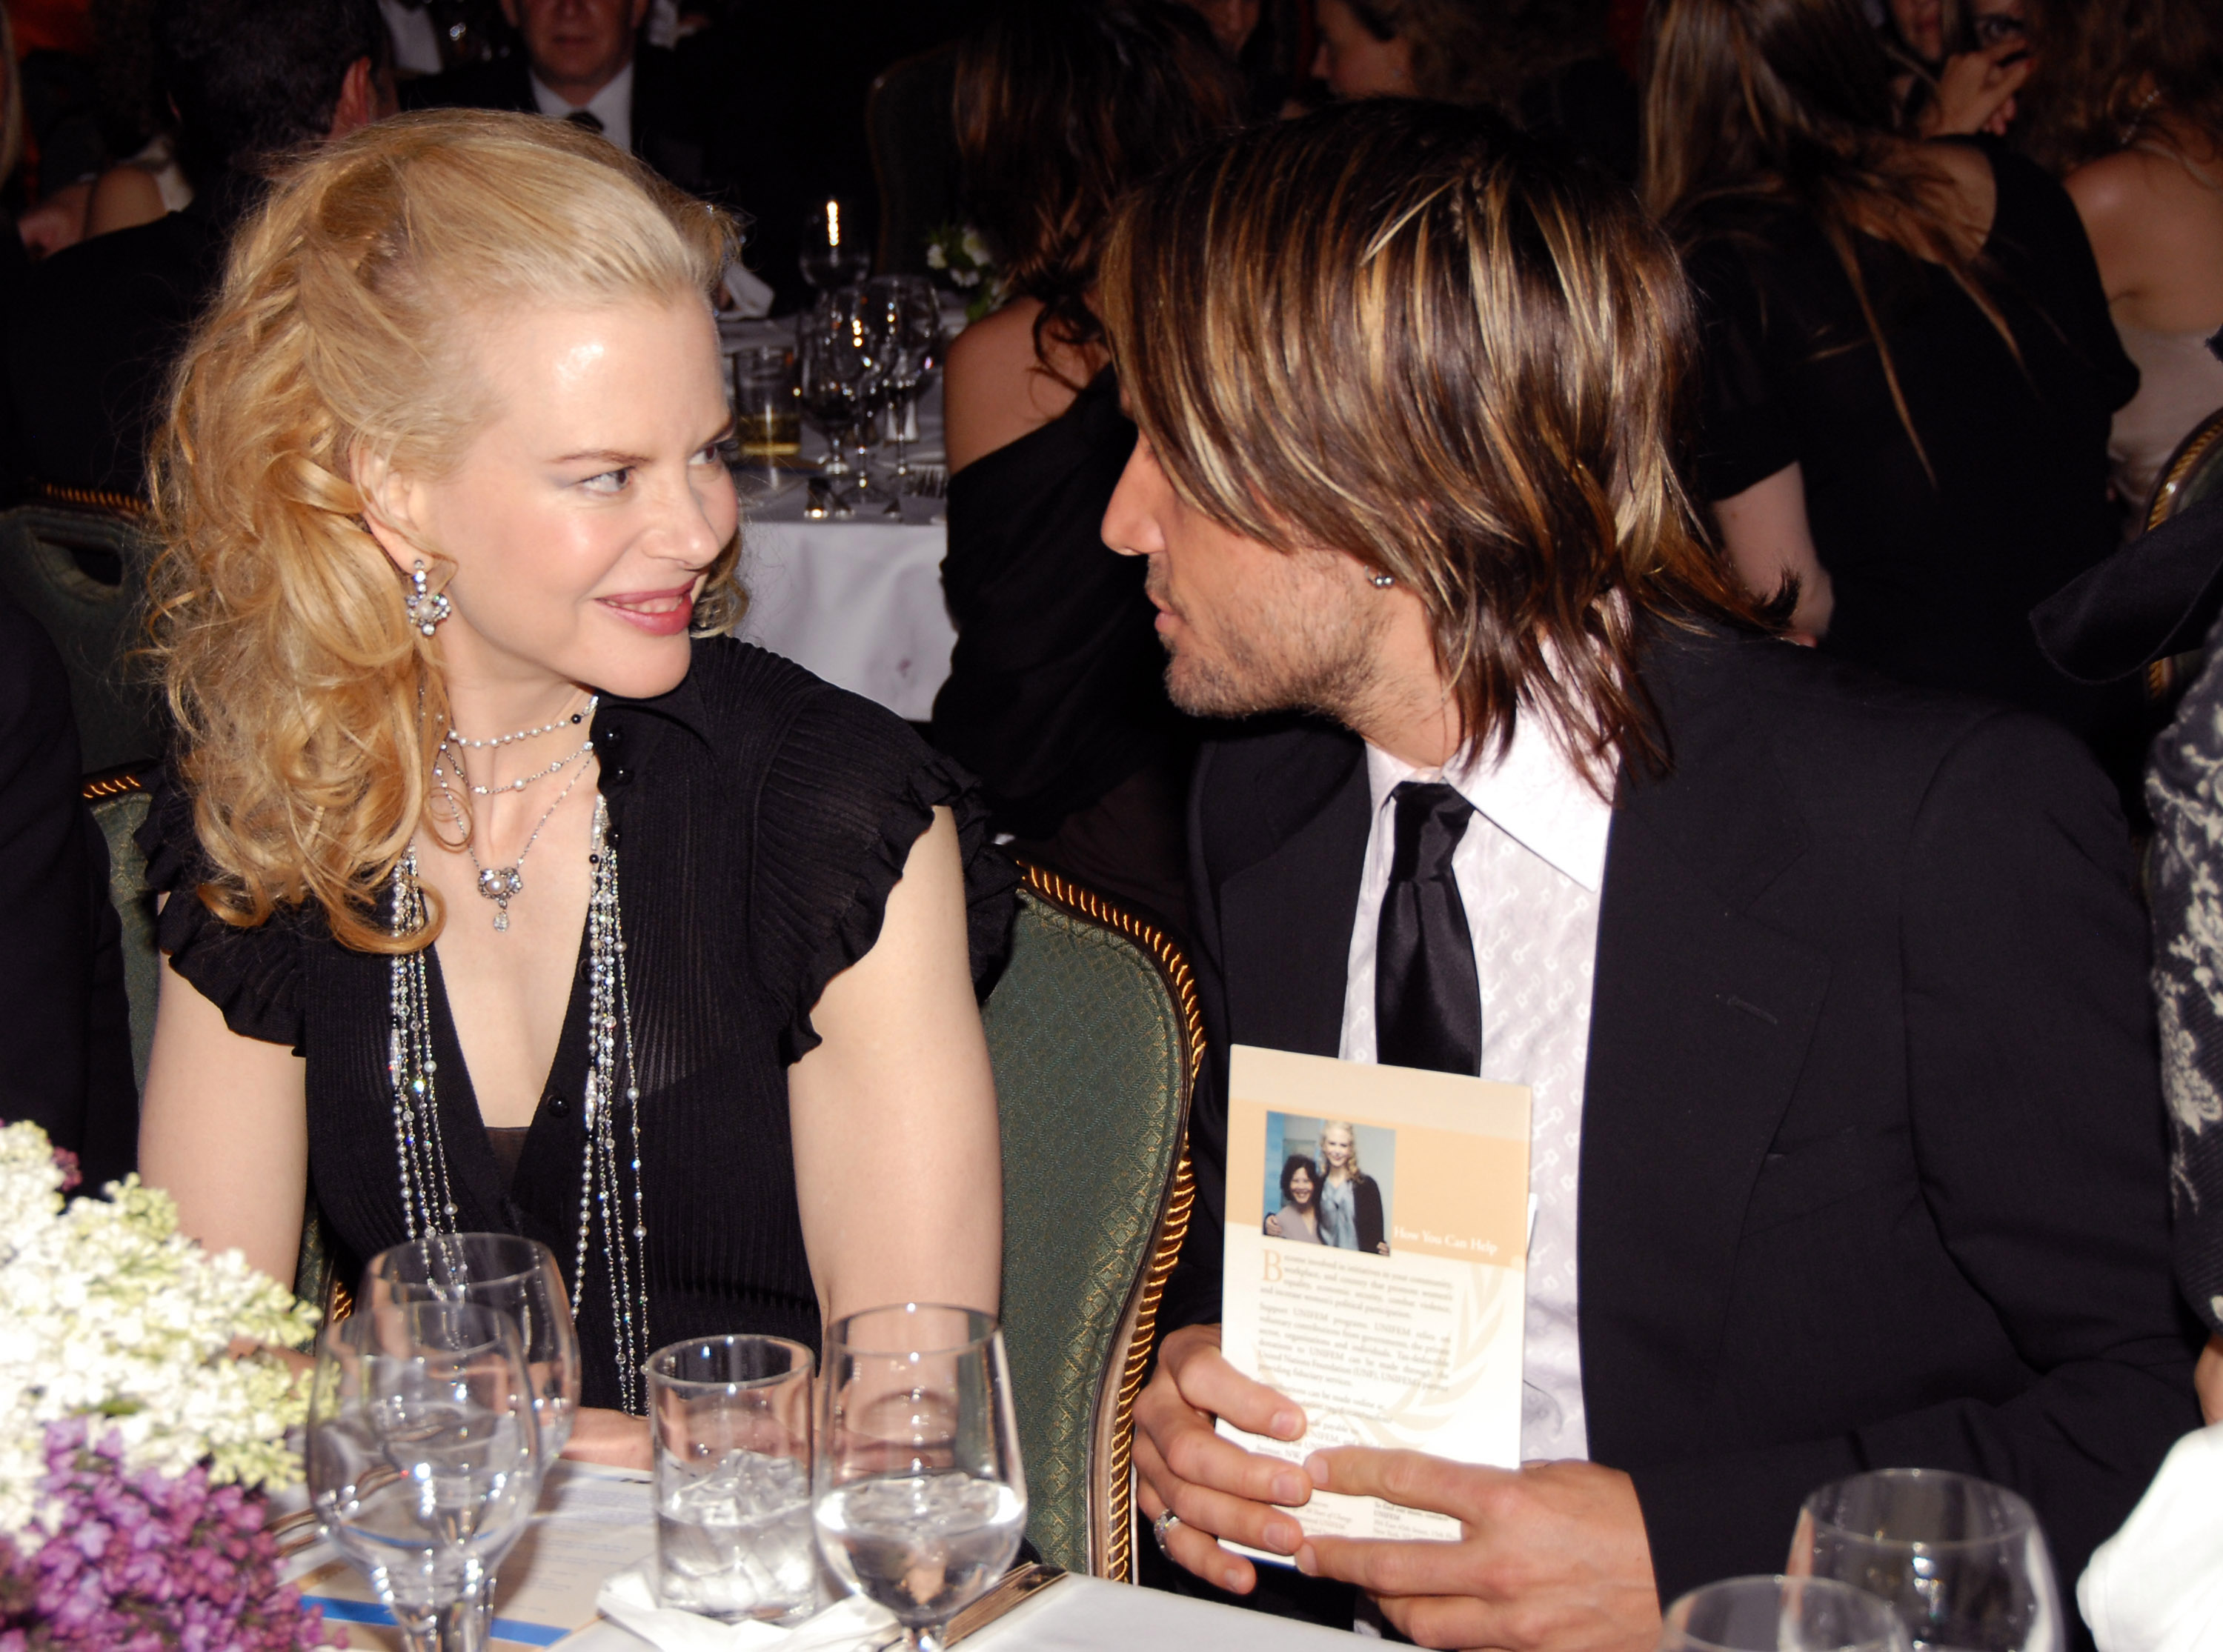 Nicole Kidman and Keith Urban during UNIFEM's 30th Anniversary Celebration in New York City, on May 13, 2006. | Source: Getty Images